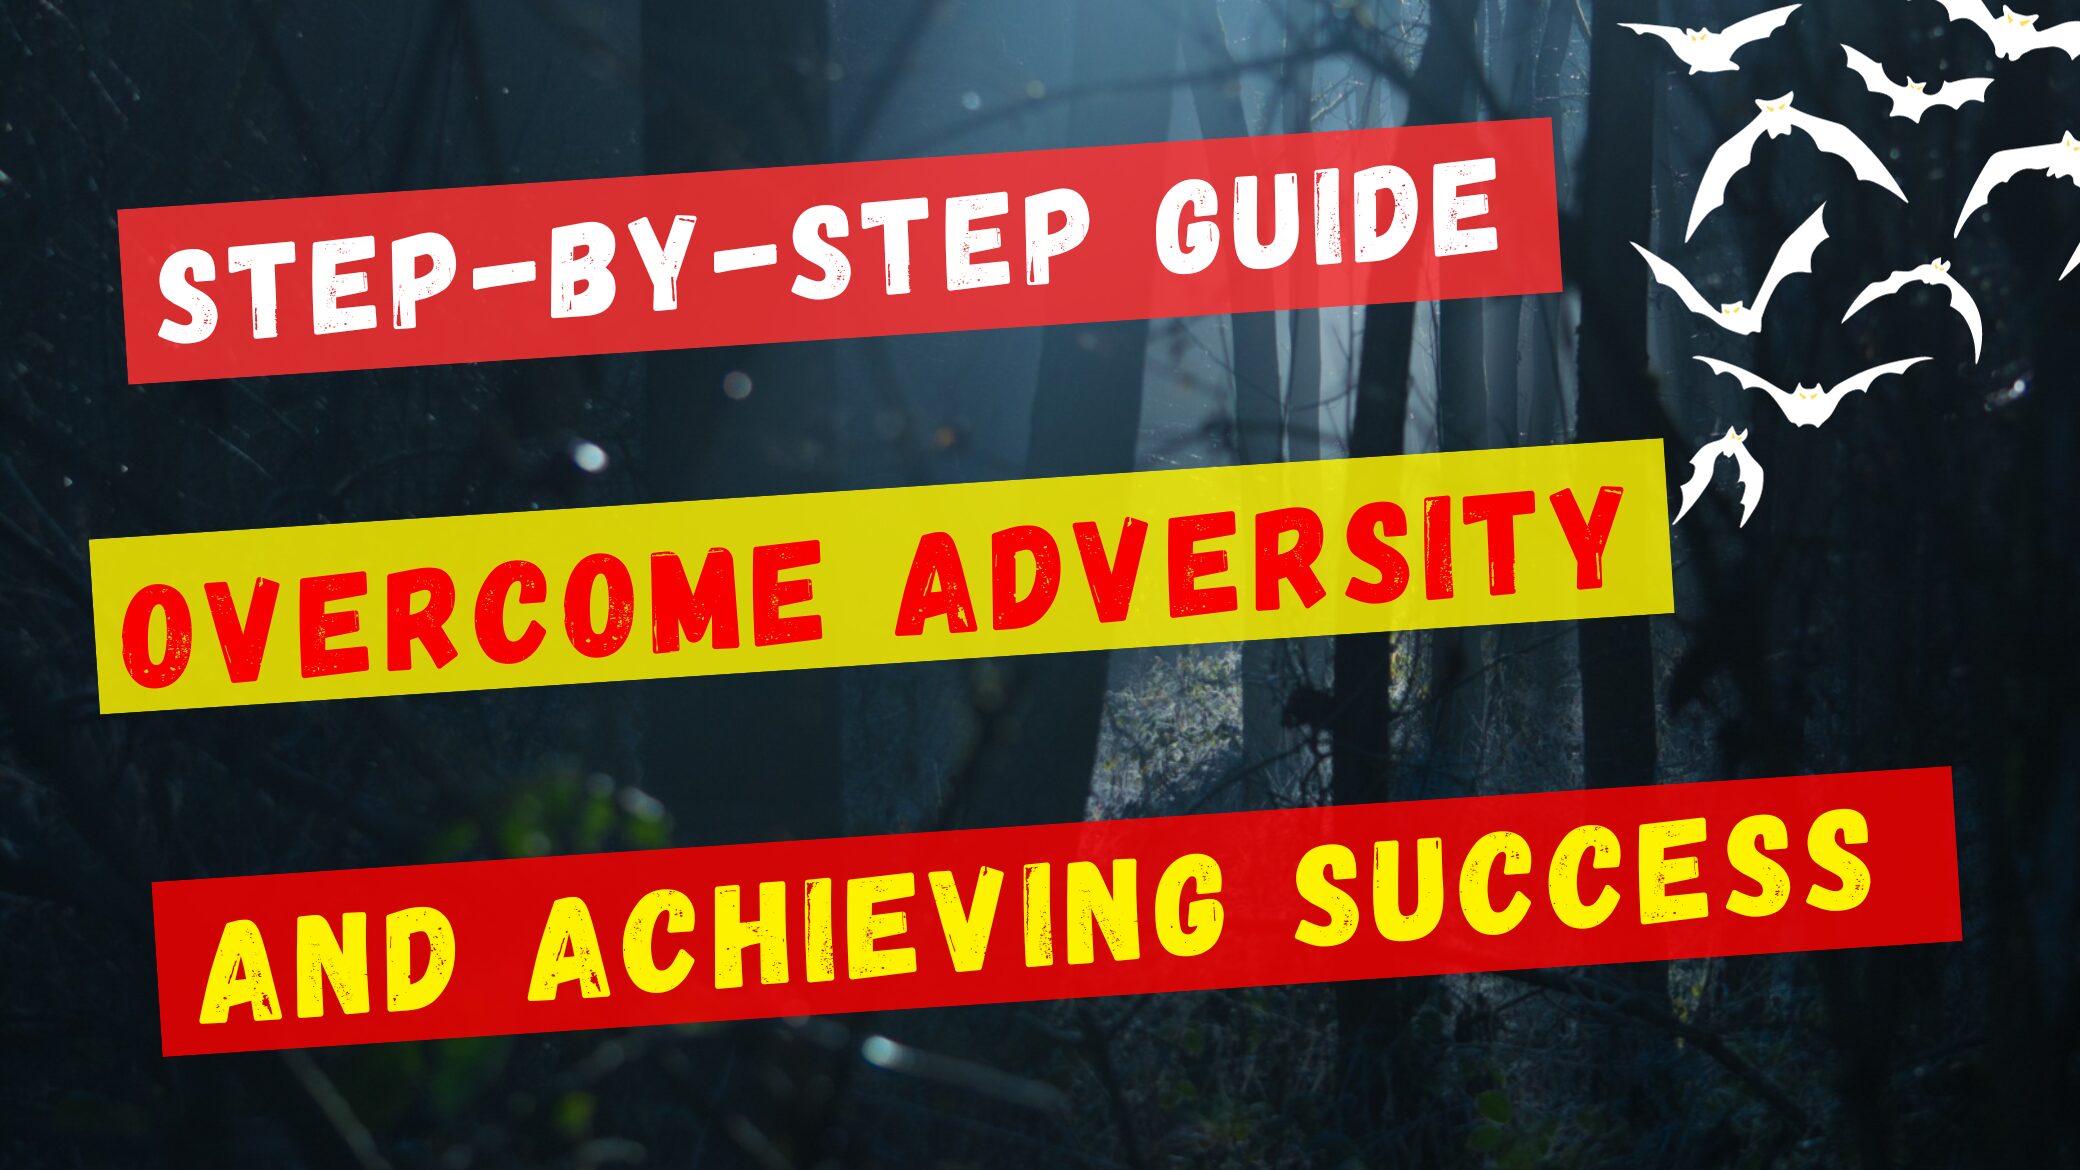 Guide to Overcome Adversity